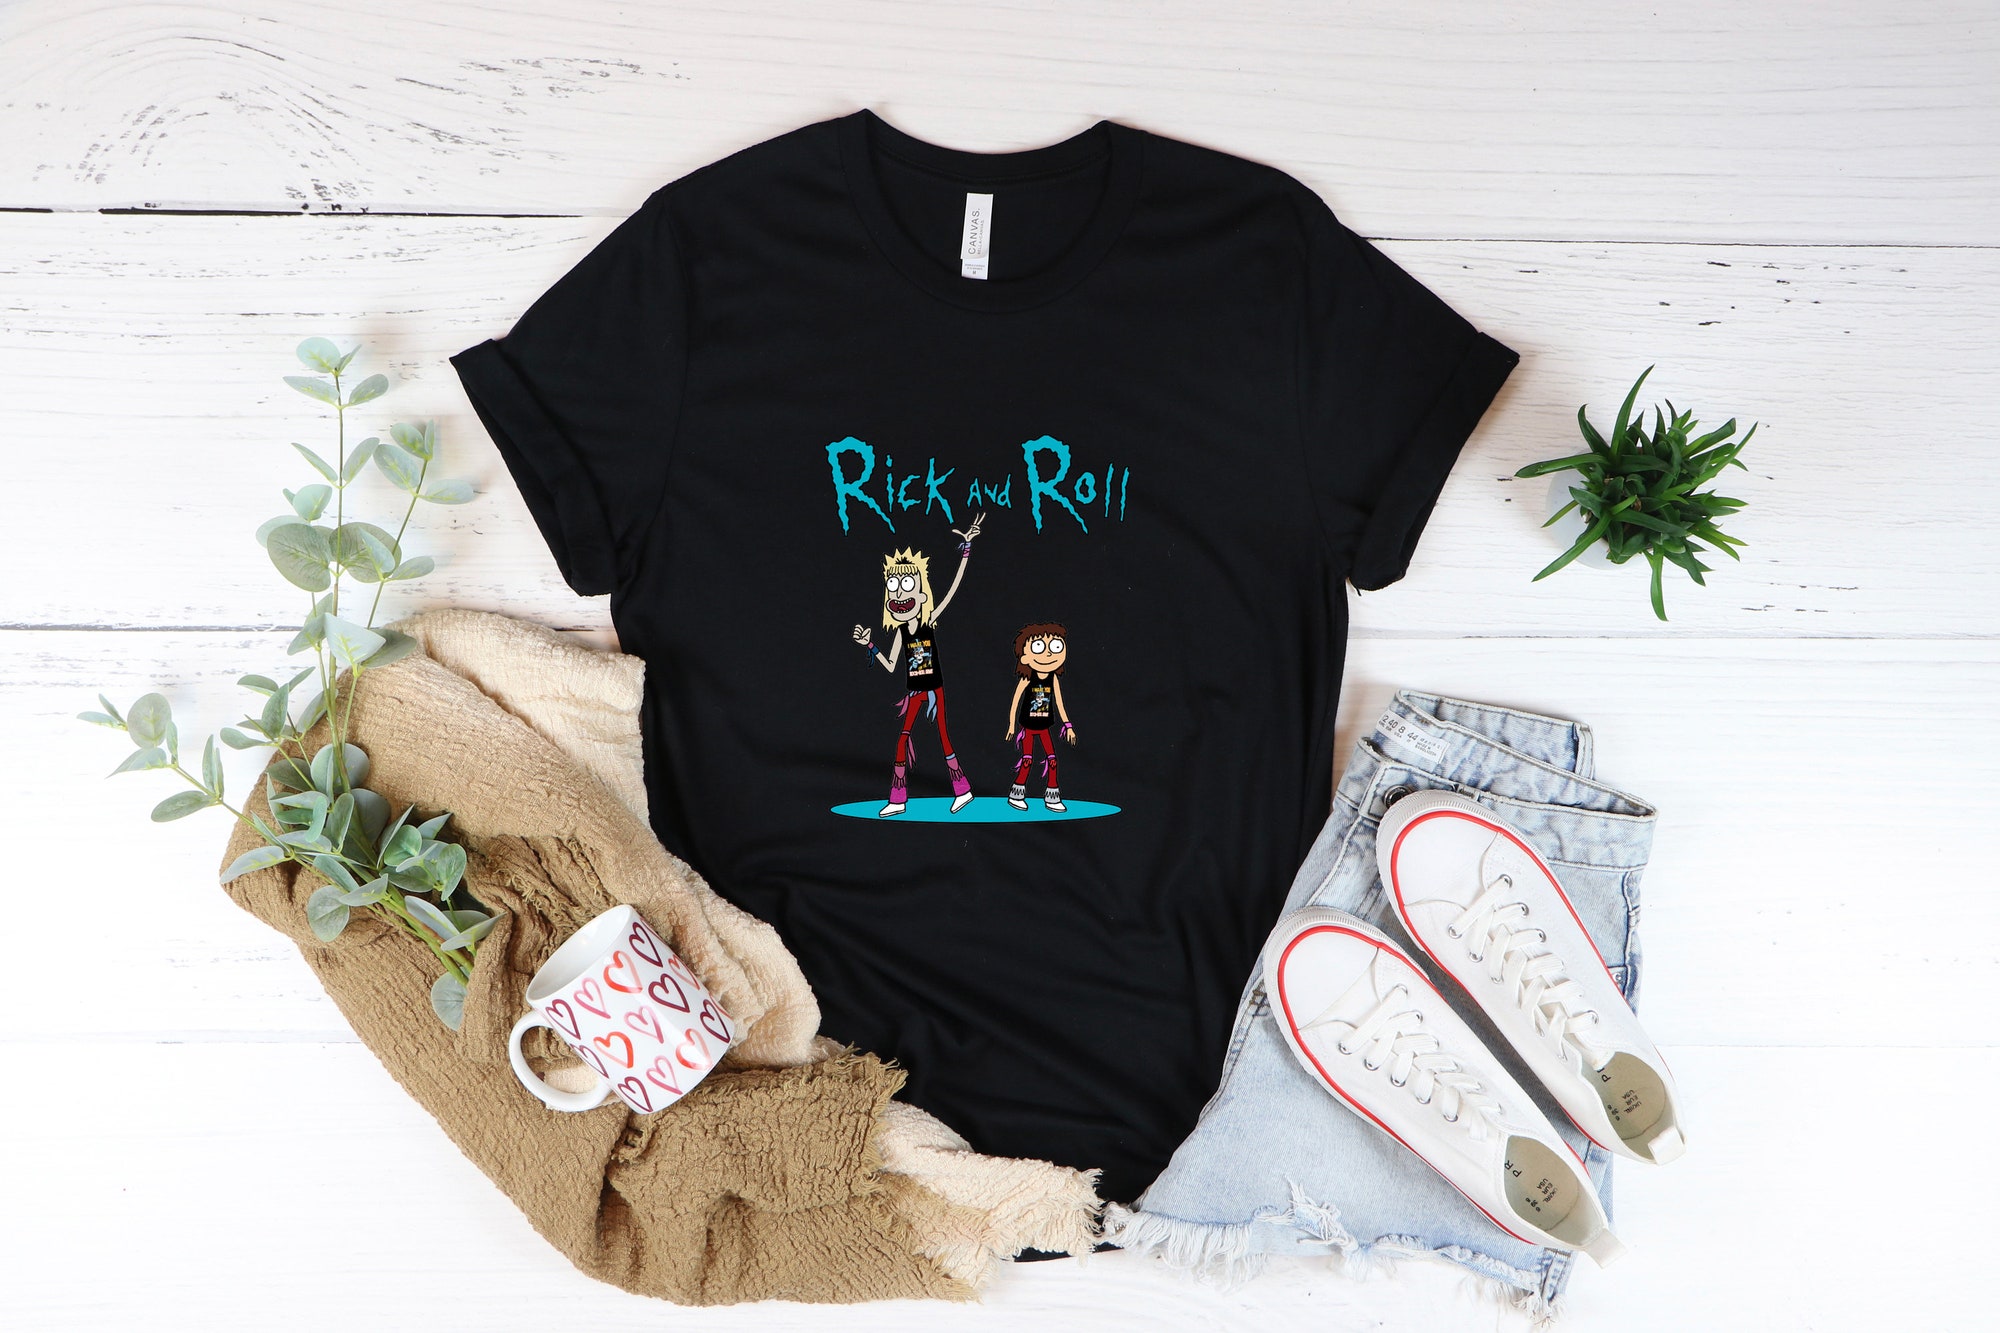 Discover Rick And Roll, Rick And Morty Shirt, Schwifty Shirt, Adult SwimRick Shirt, Rick and Morty Gift, Funny Comedy Cartoon Design Tshirt  #GD0029